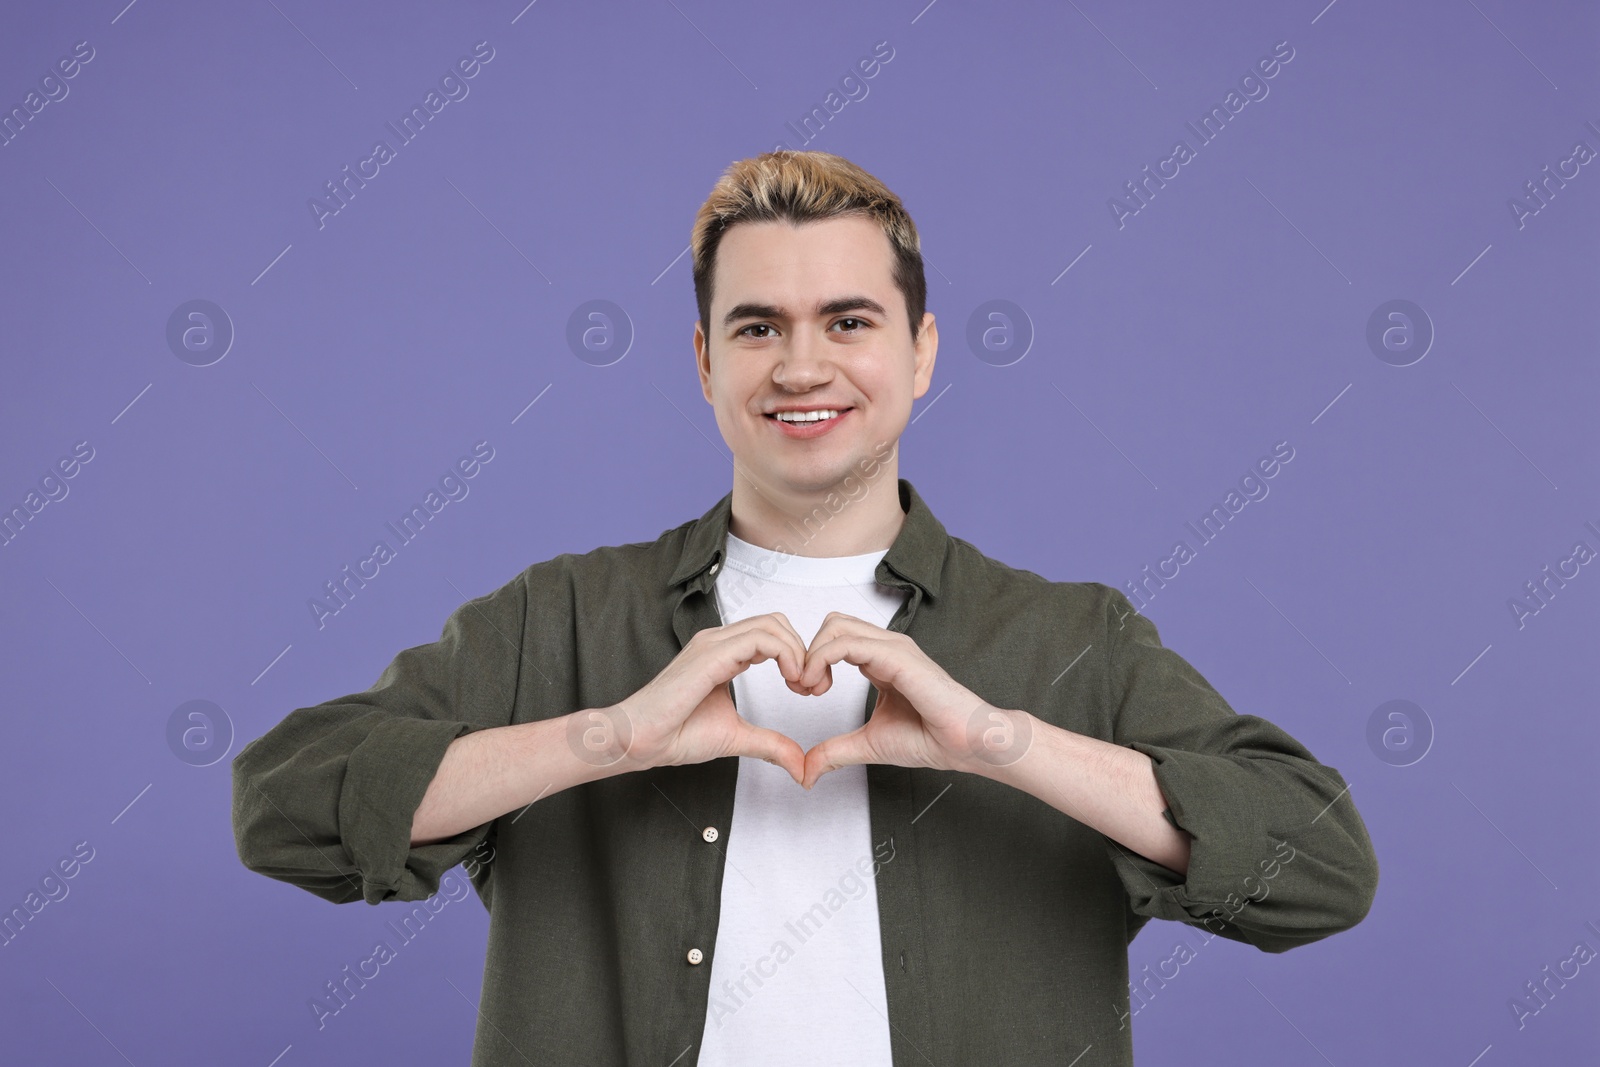 Photo of Young man showing heart gesture with hands on purple background